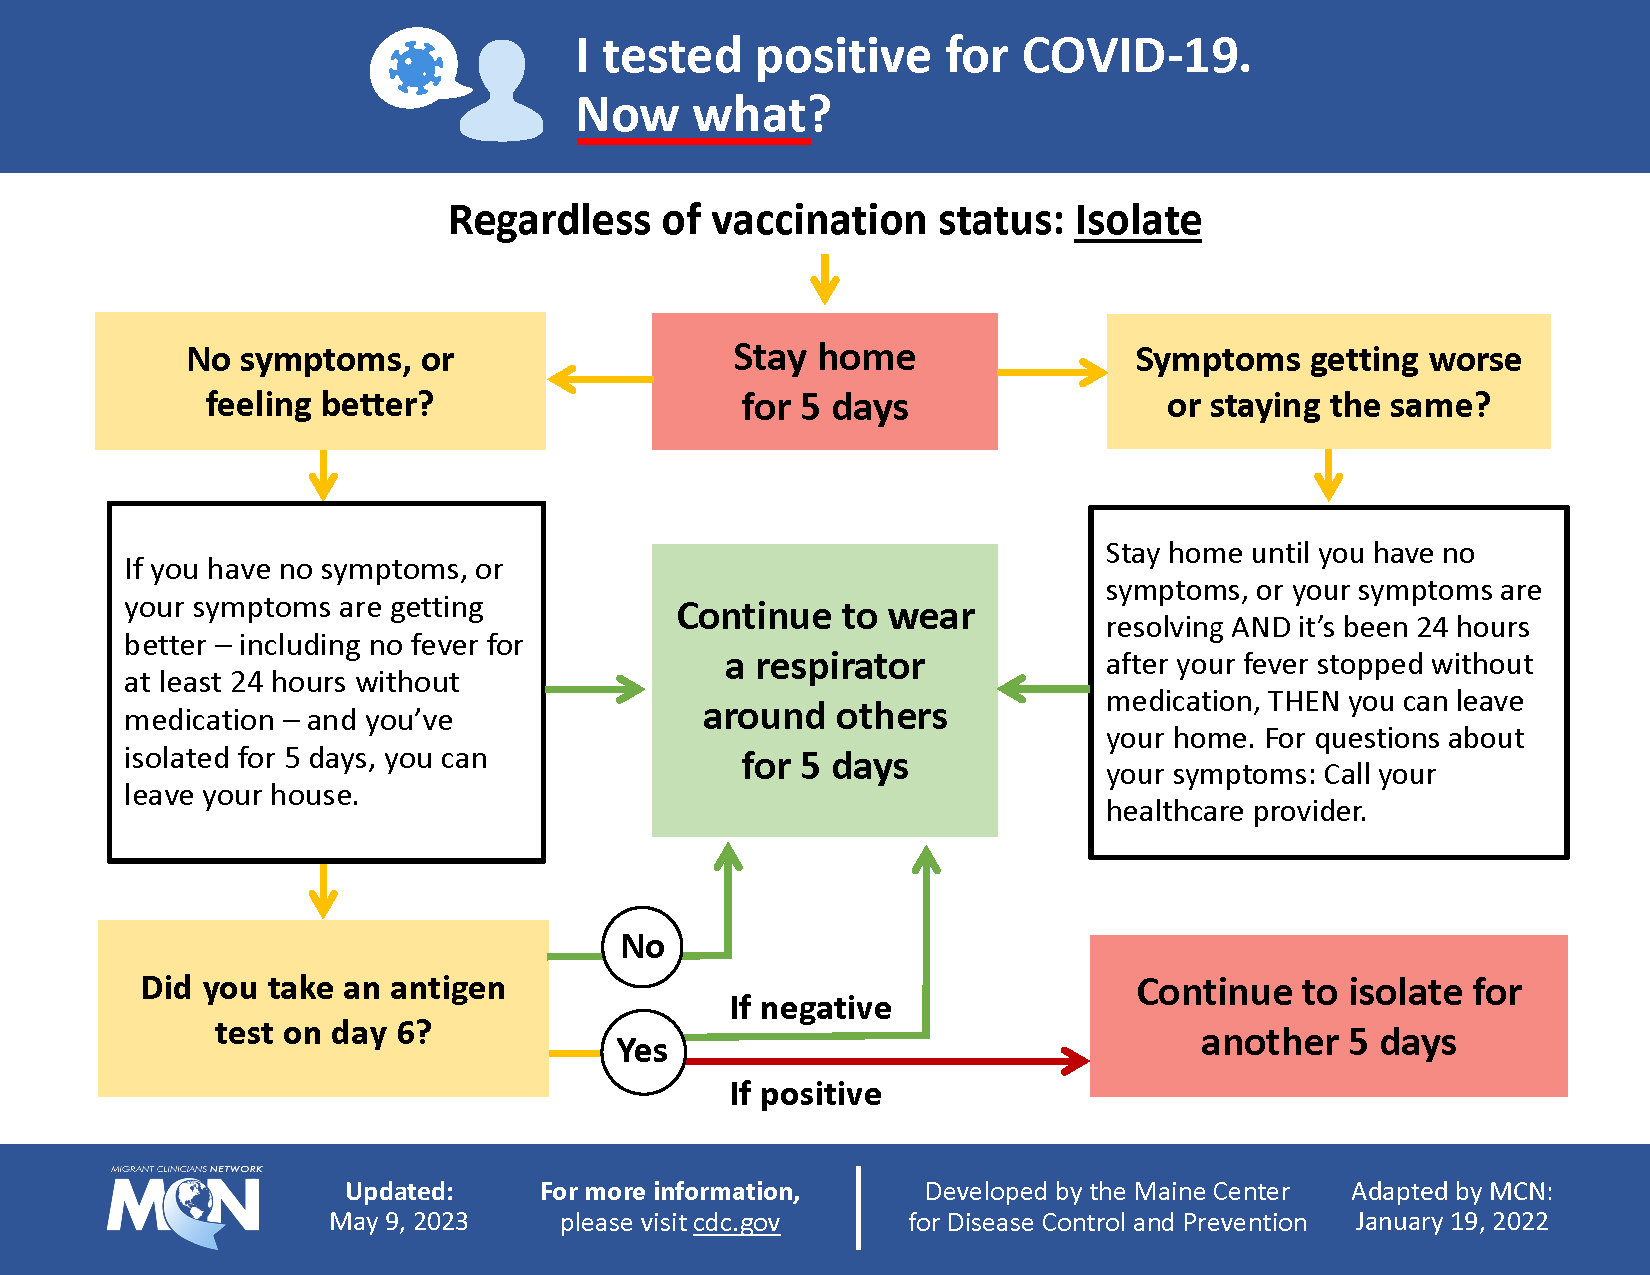 I Tested Positive for COVID-19 Flowchart